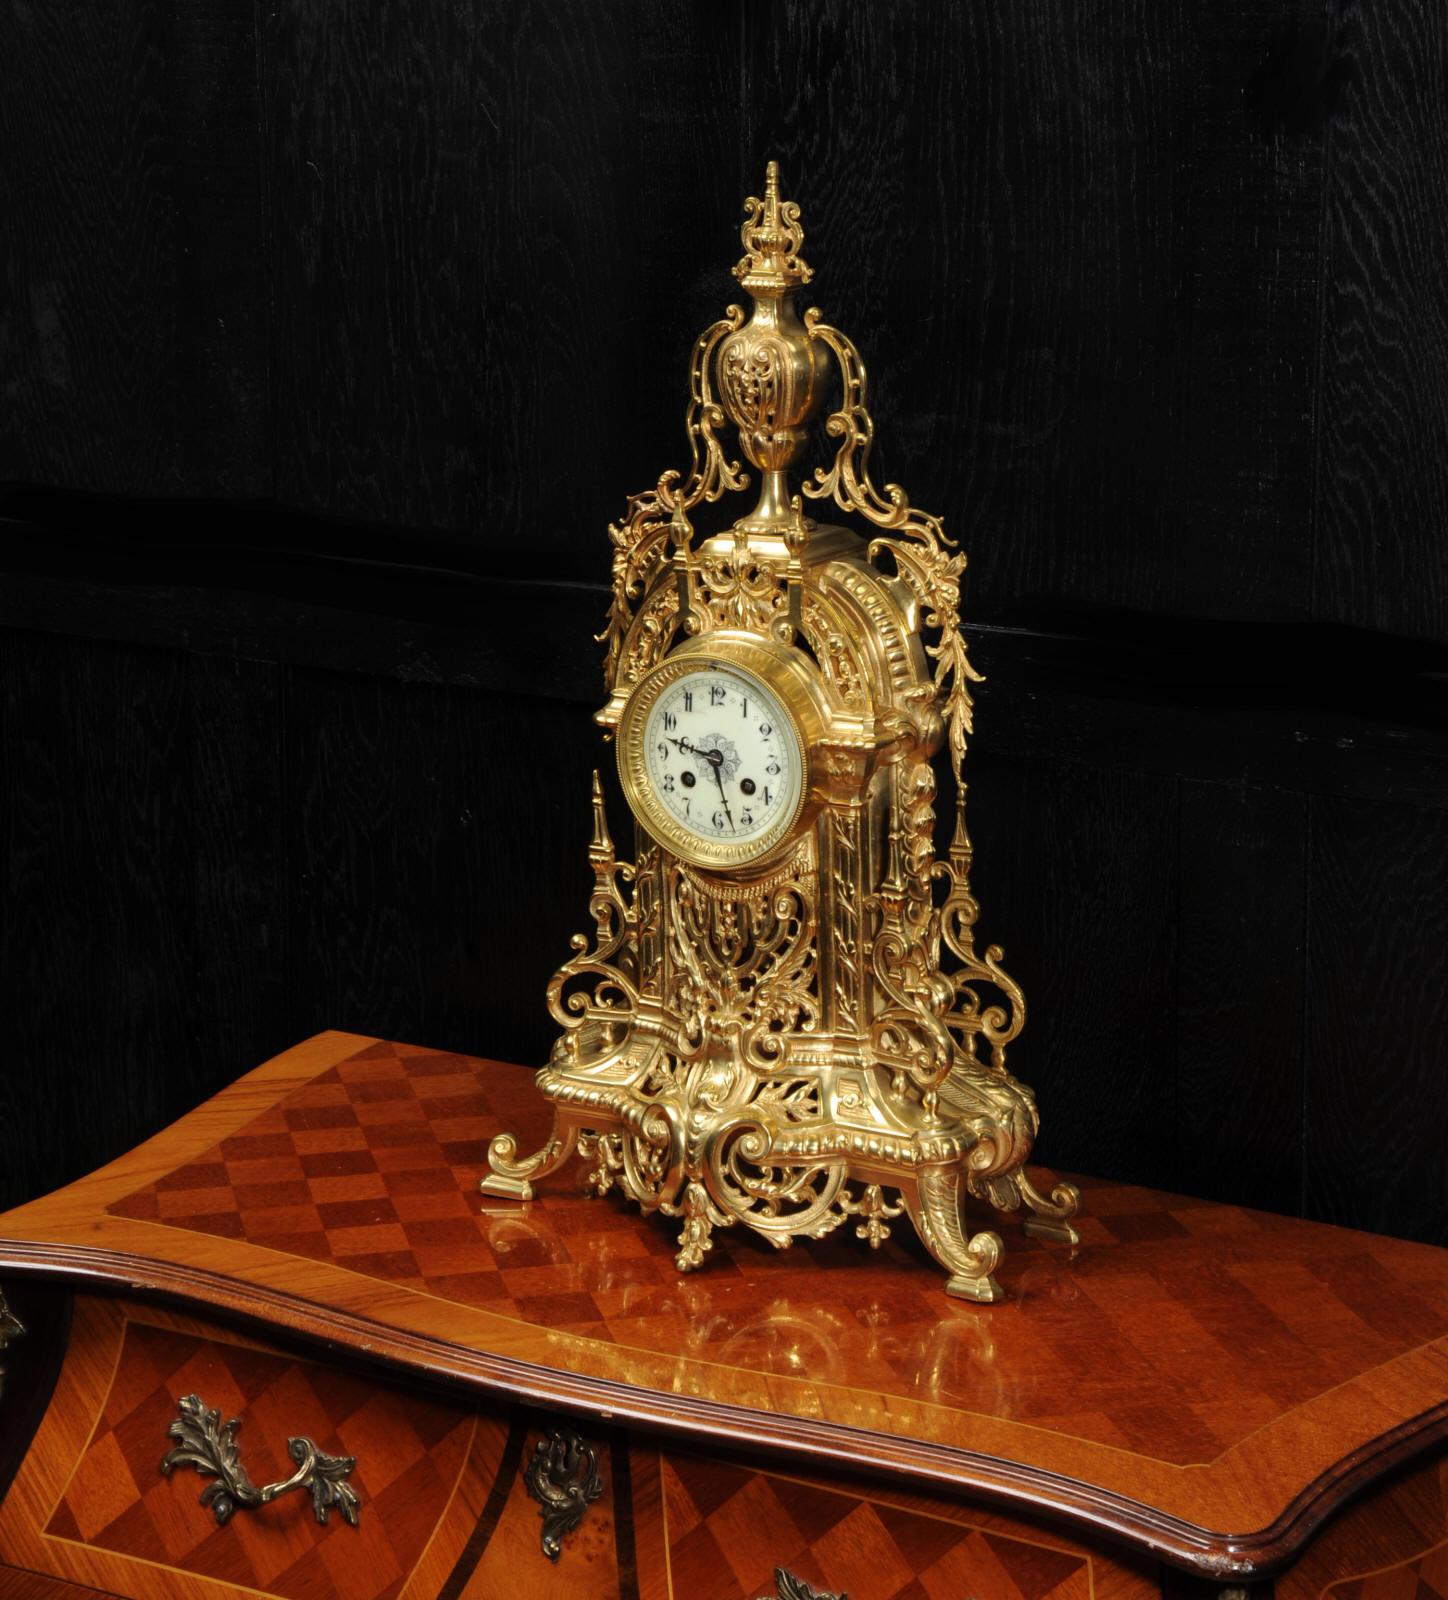 A large and stunning original antique French clock by A.D. Mougin, circa 1900. It is beautifully made from gilded bronze in the Baroque style. It is modeled with profuse, stylized acanthus with the front delicately fretted to allow a glimpse of the